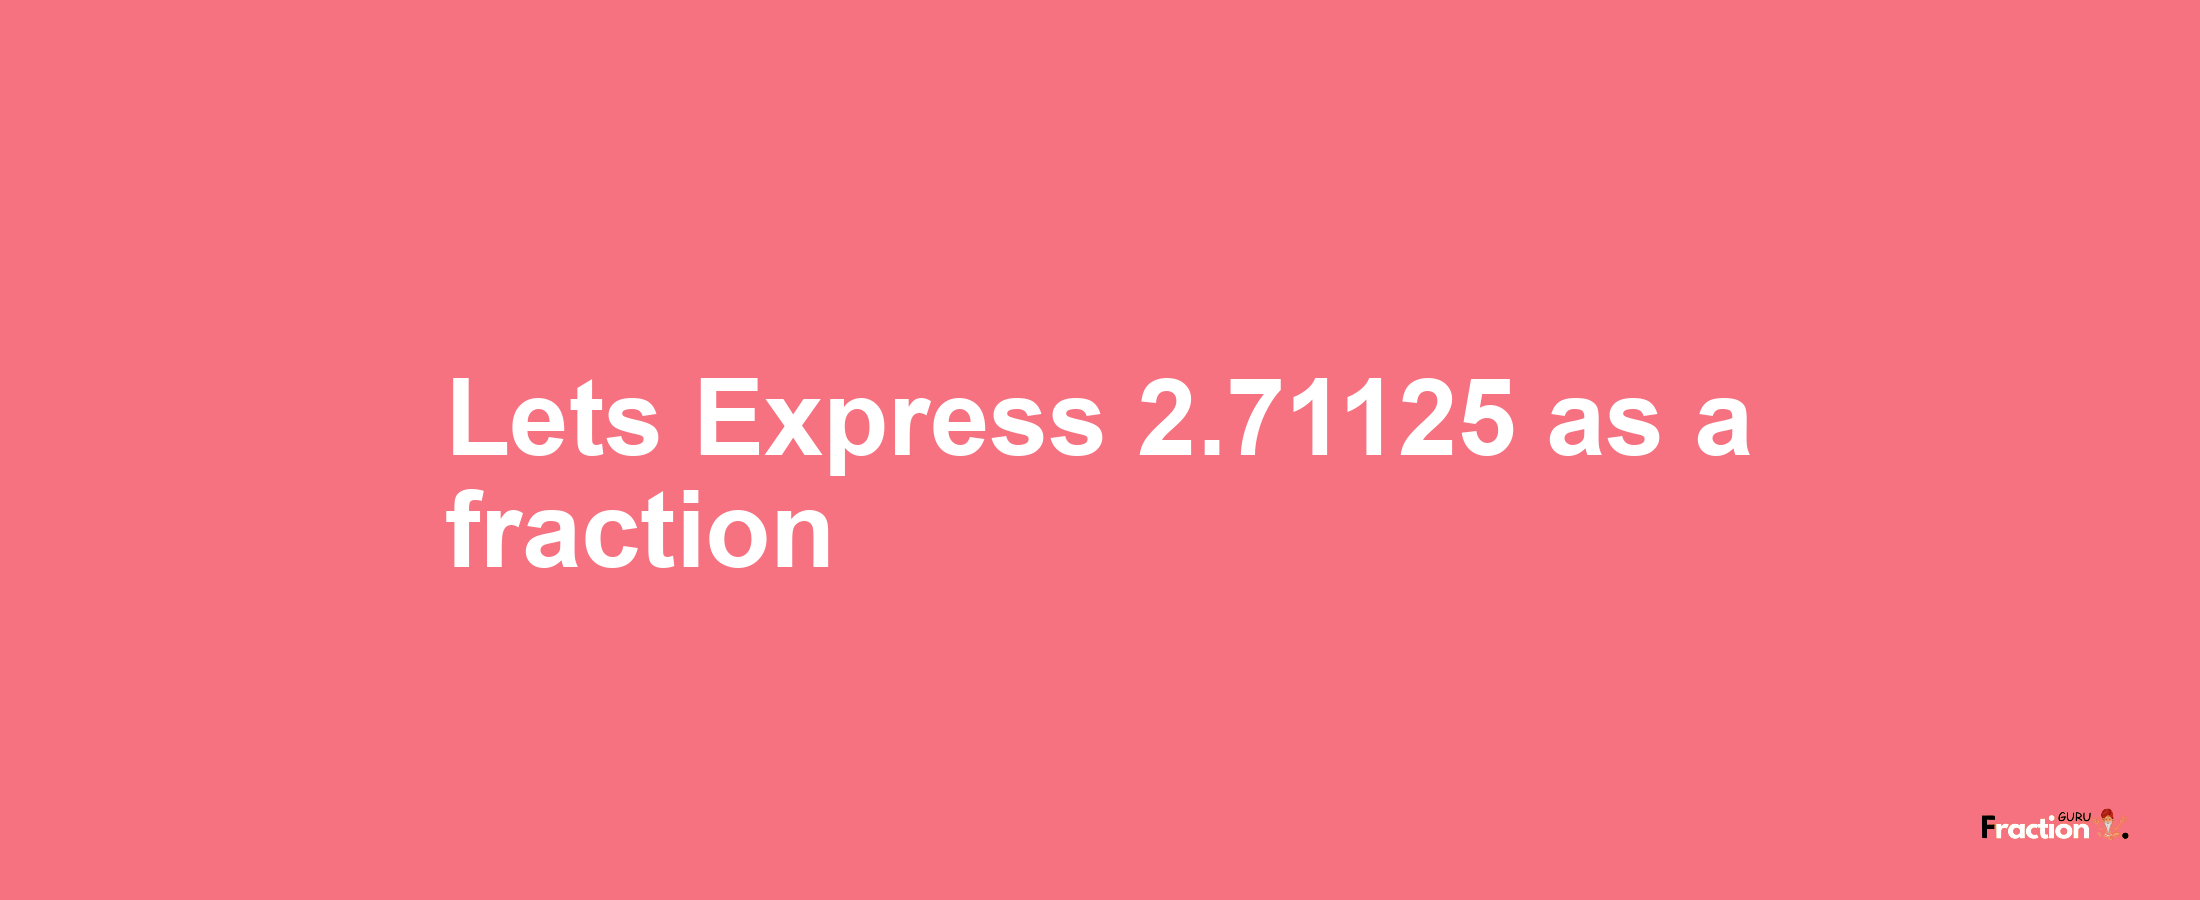 Lets Express 2.71125 as afraction